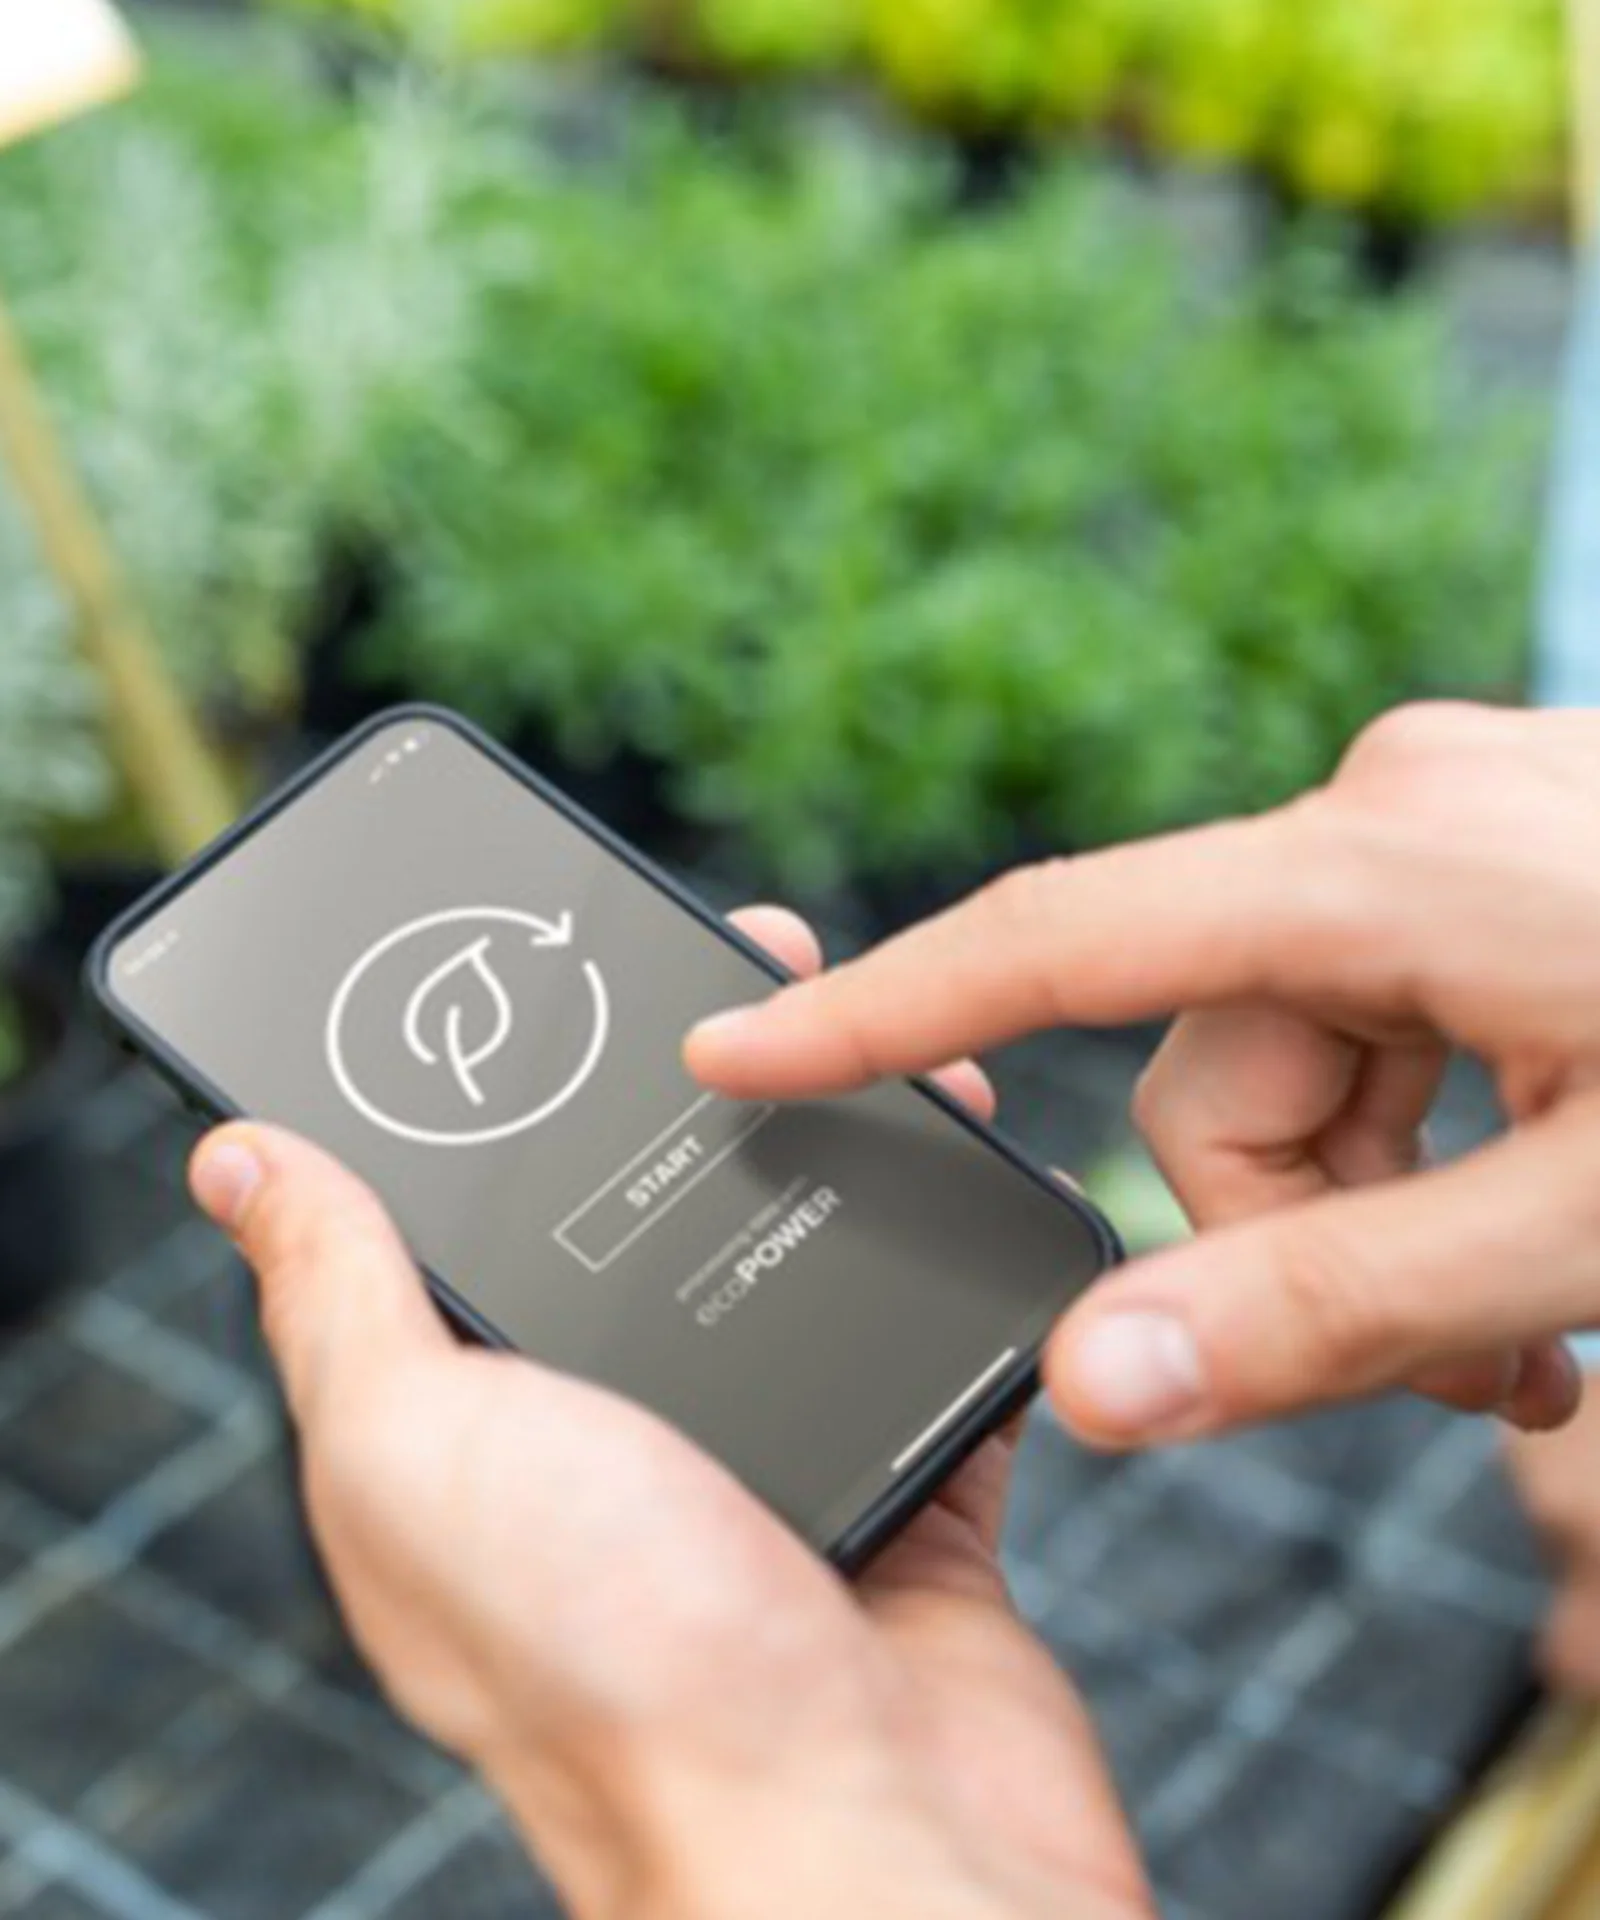 This teaser visual showcases hands interacting with a smartphone that displays a green task scheduling app. The background is a blurred view of a greenhouse, symbolizing the integration of technology with eco-friendly practices. The image highlights the concept of carbon-reduced data processing and the future of sustainable technology solutions.